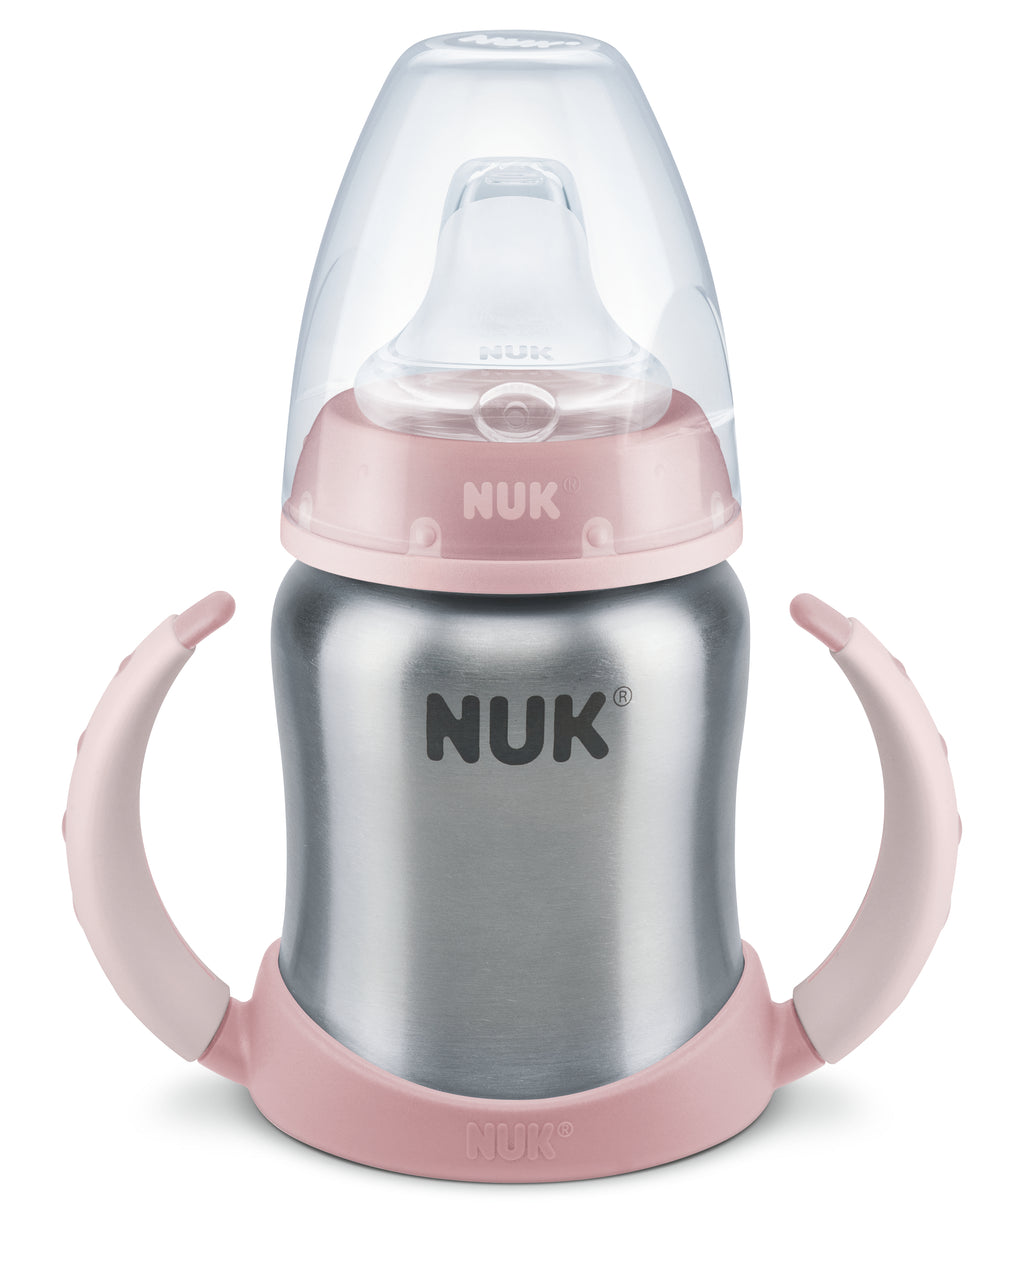 NUK Stainless Steel Learner Cup